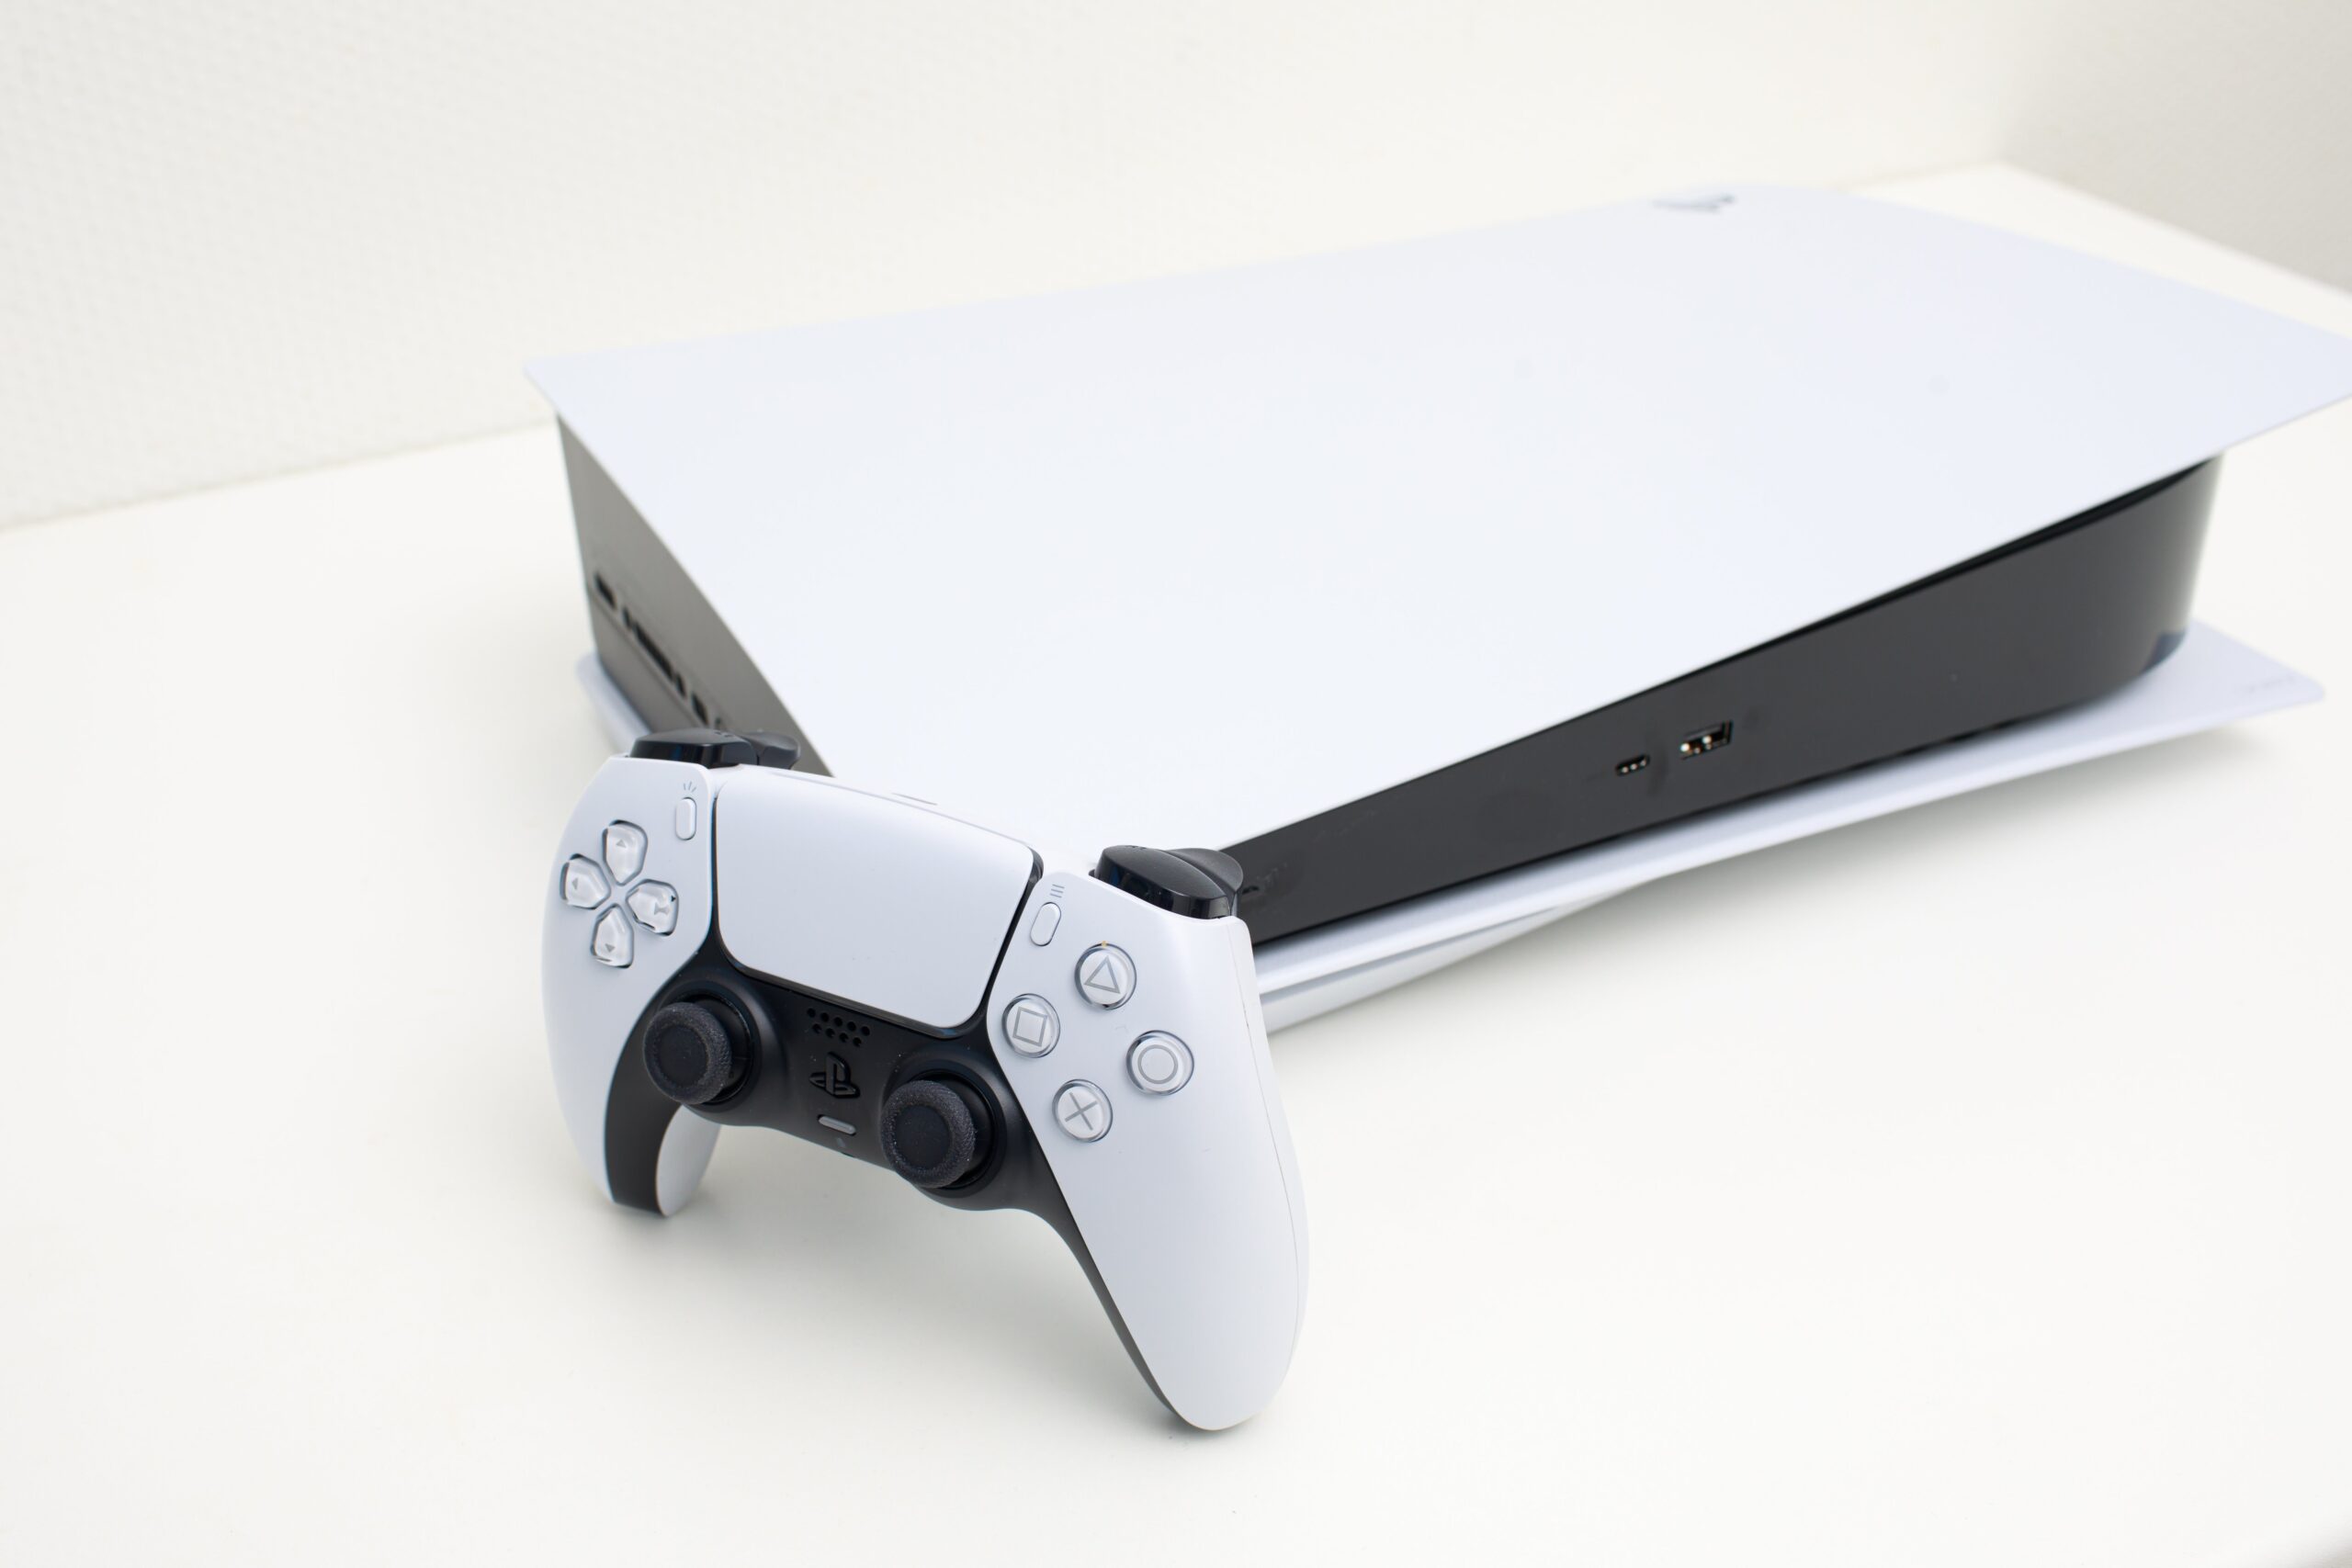 stock image of an original playstation 5 console